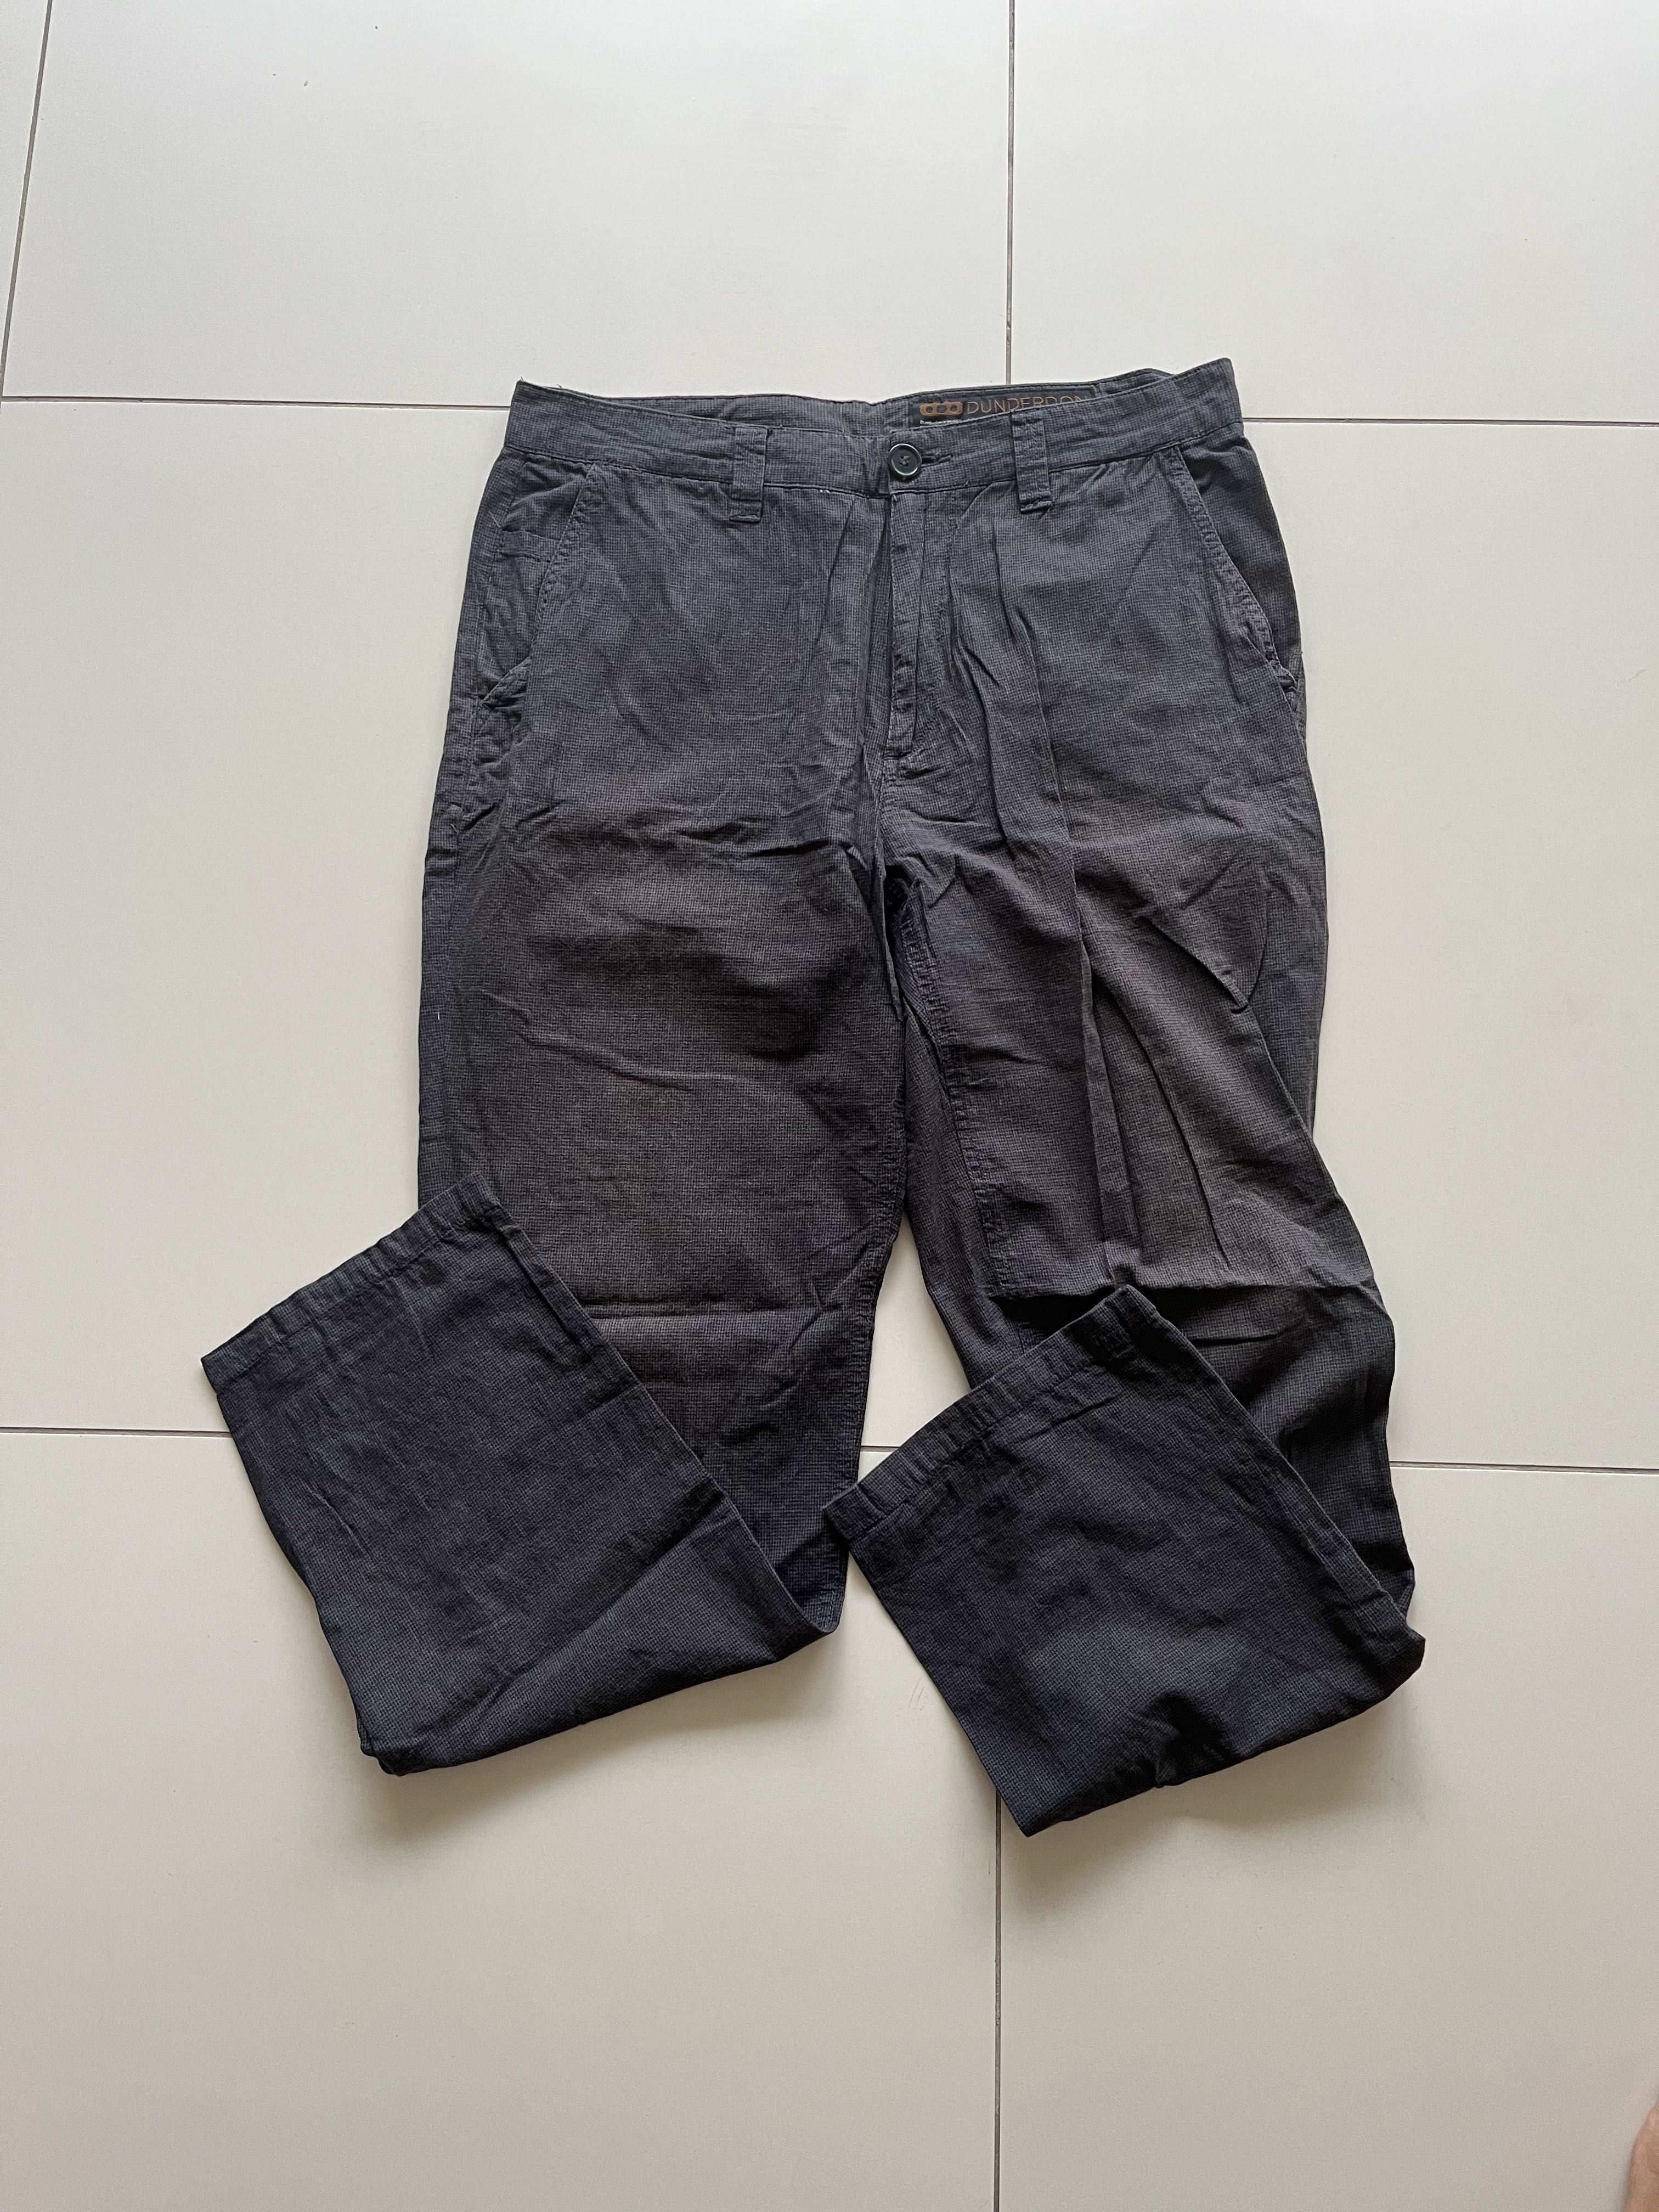 Mens grey Pants, Men's Fashion, Bottoms, Trousers on Carousell